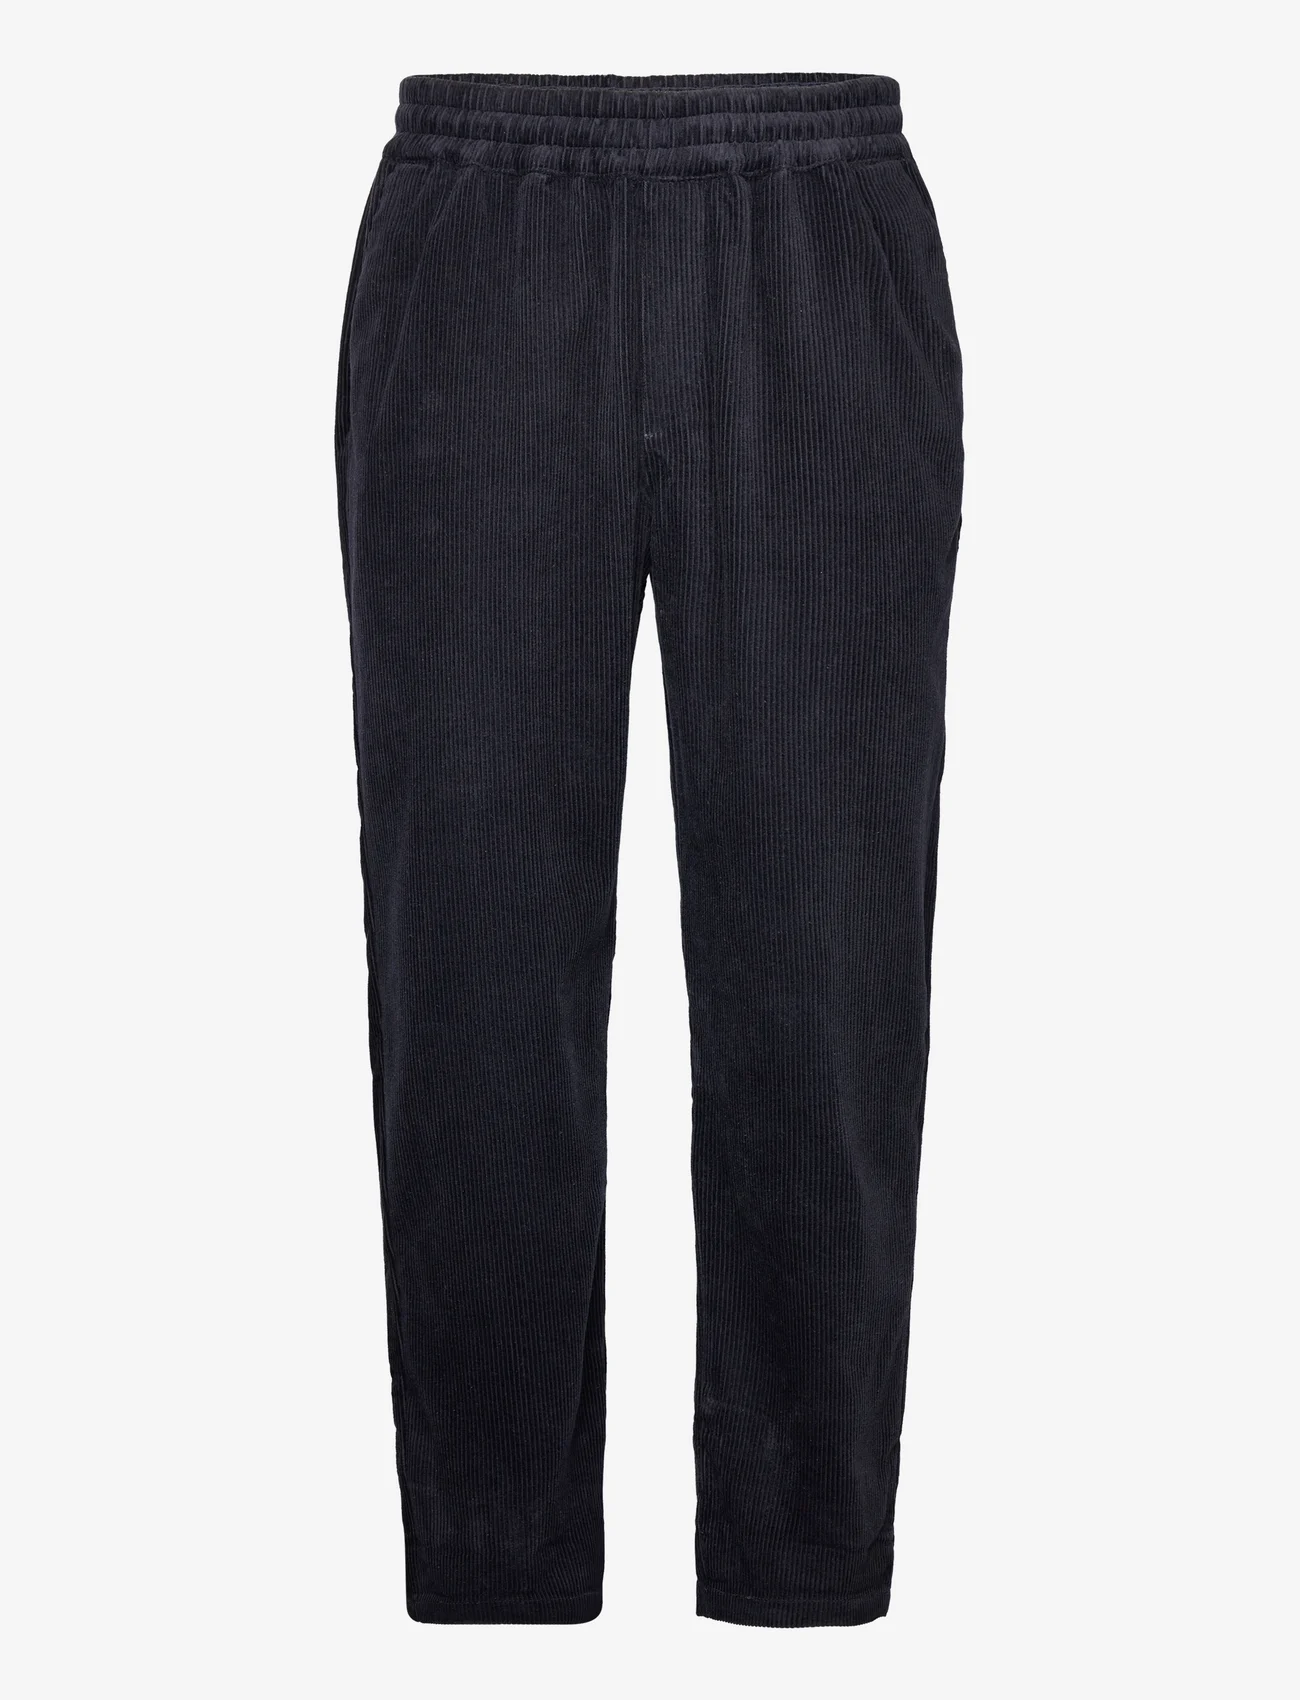 Revolution - Casual Trousers - casual trousers - navy - 0